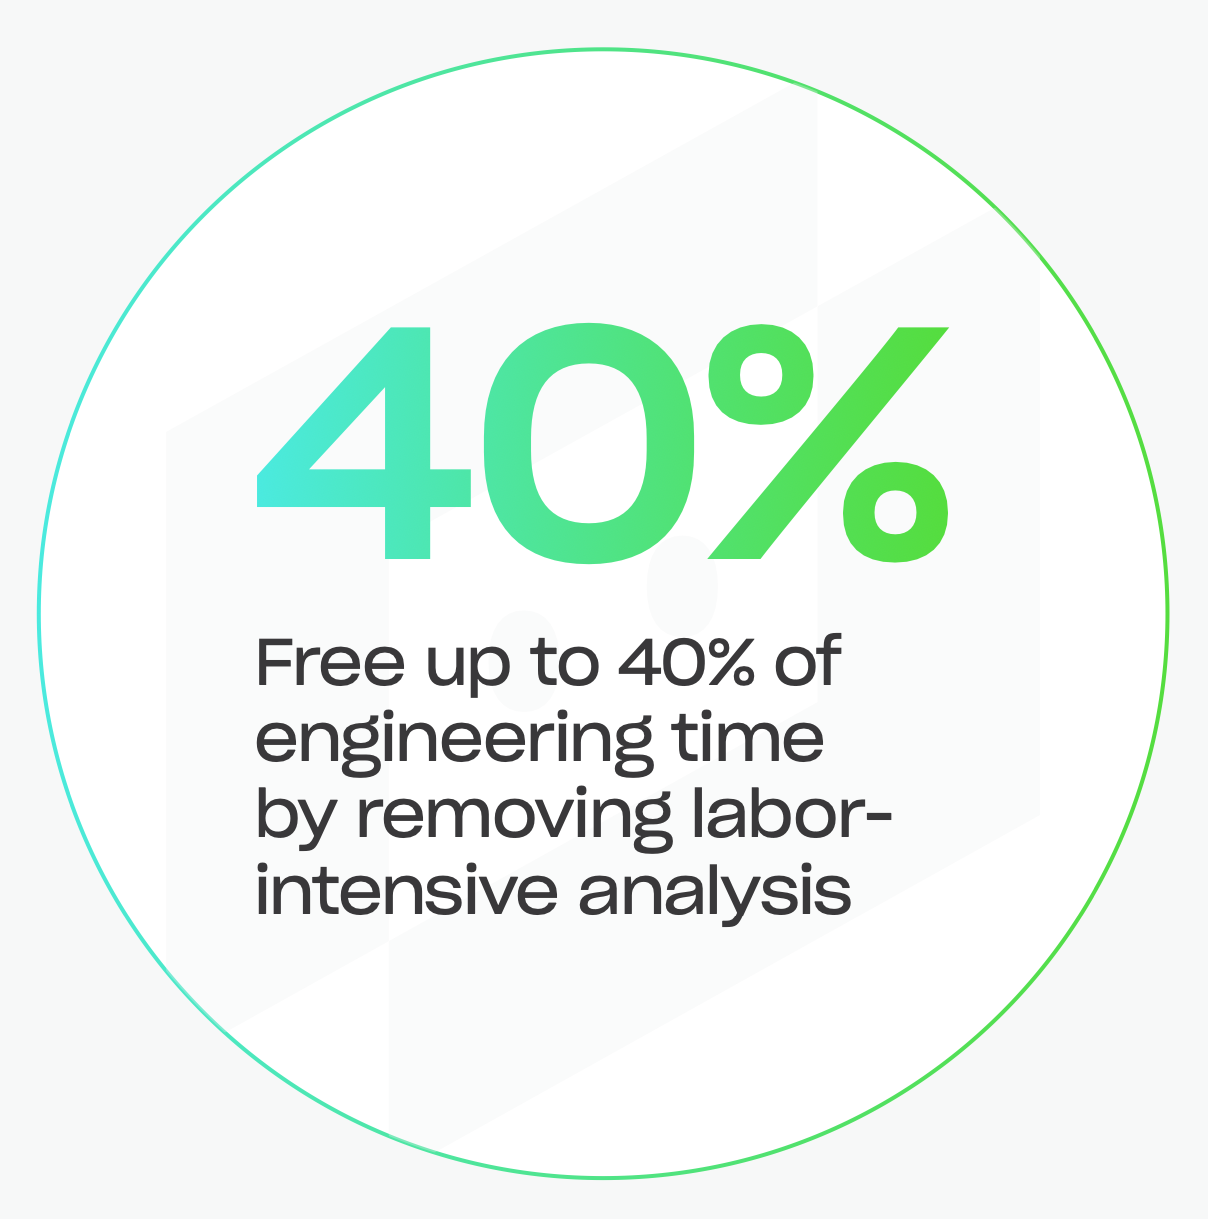 Free up to 40% of engineering time by removing labor-intensive analysis